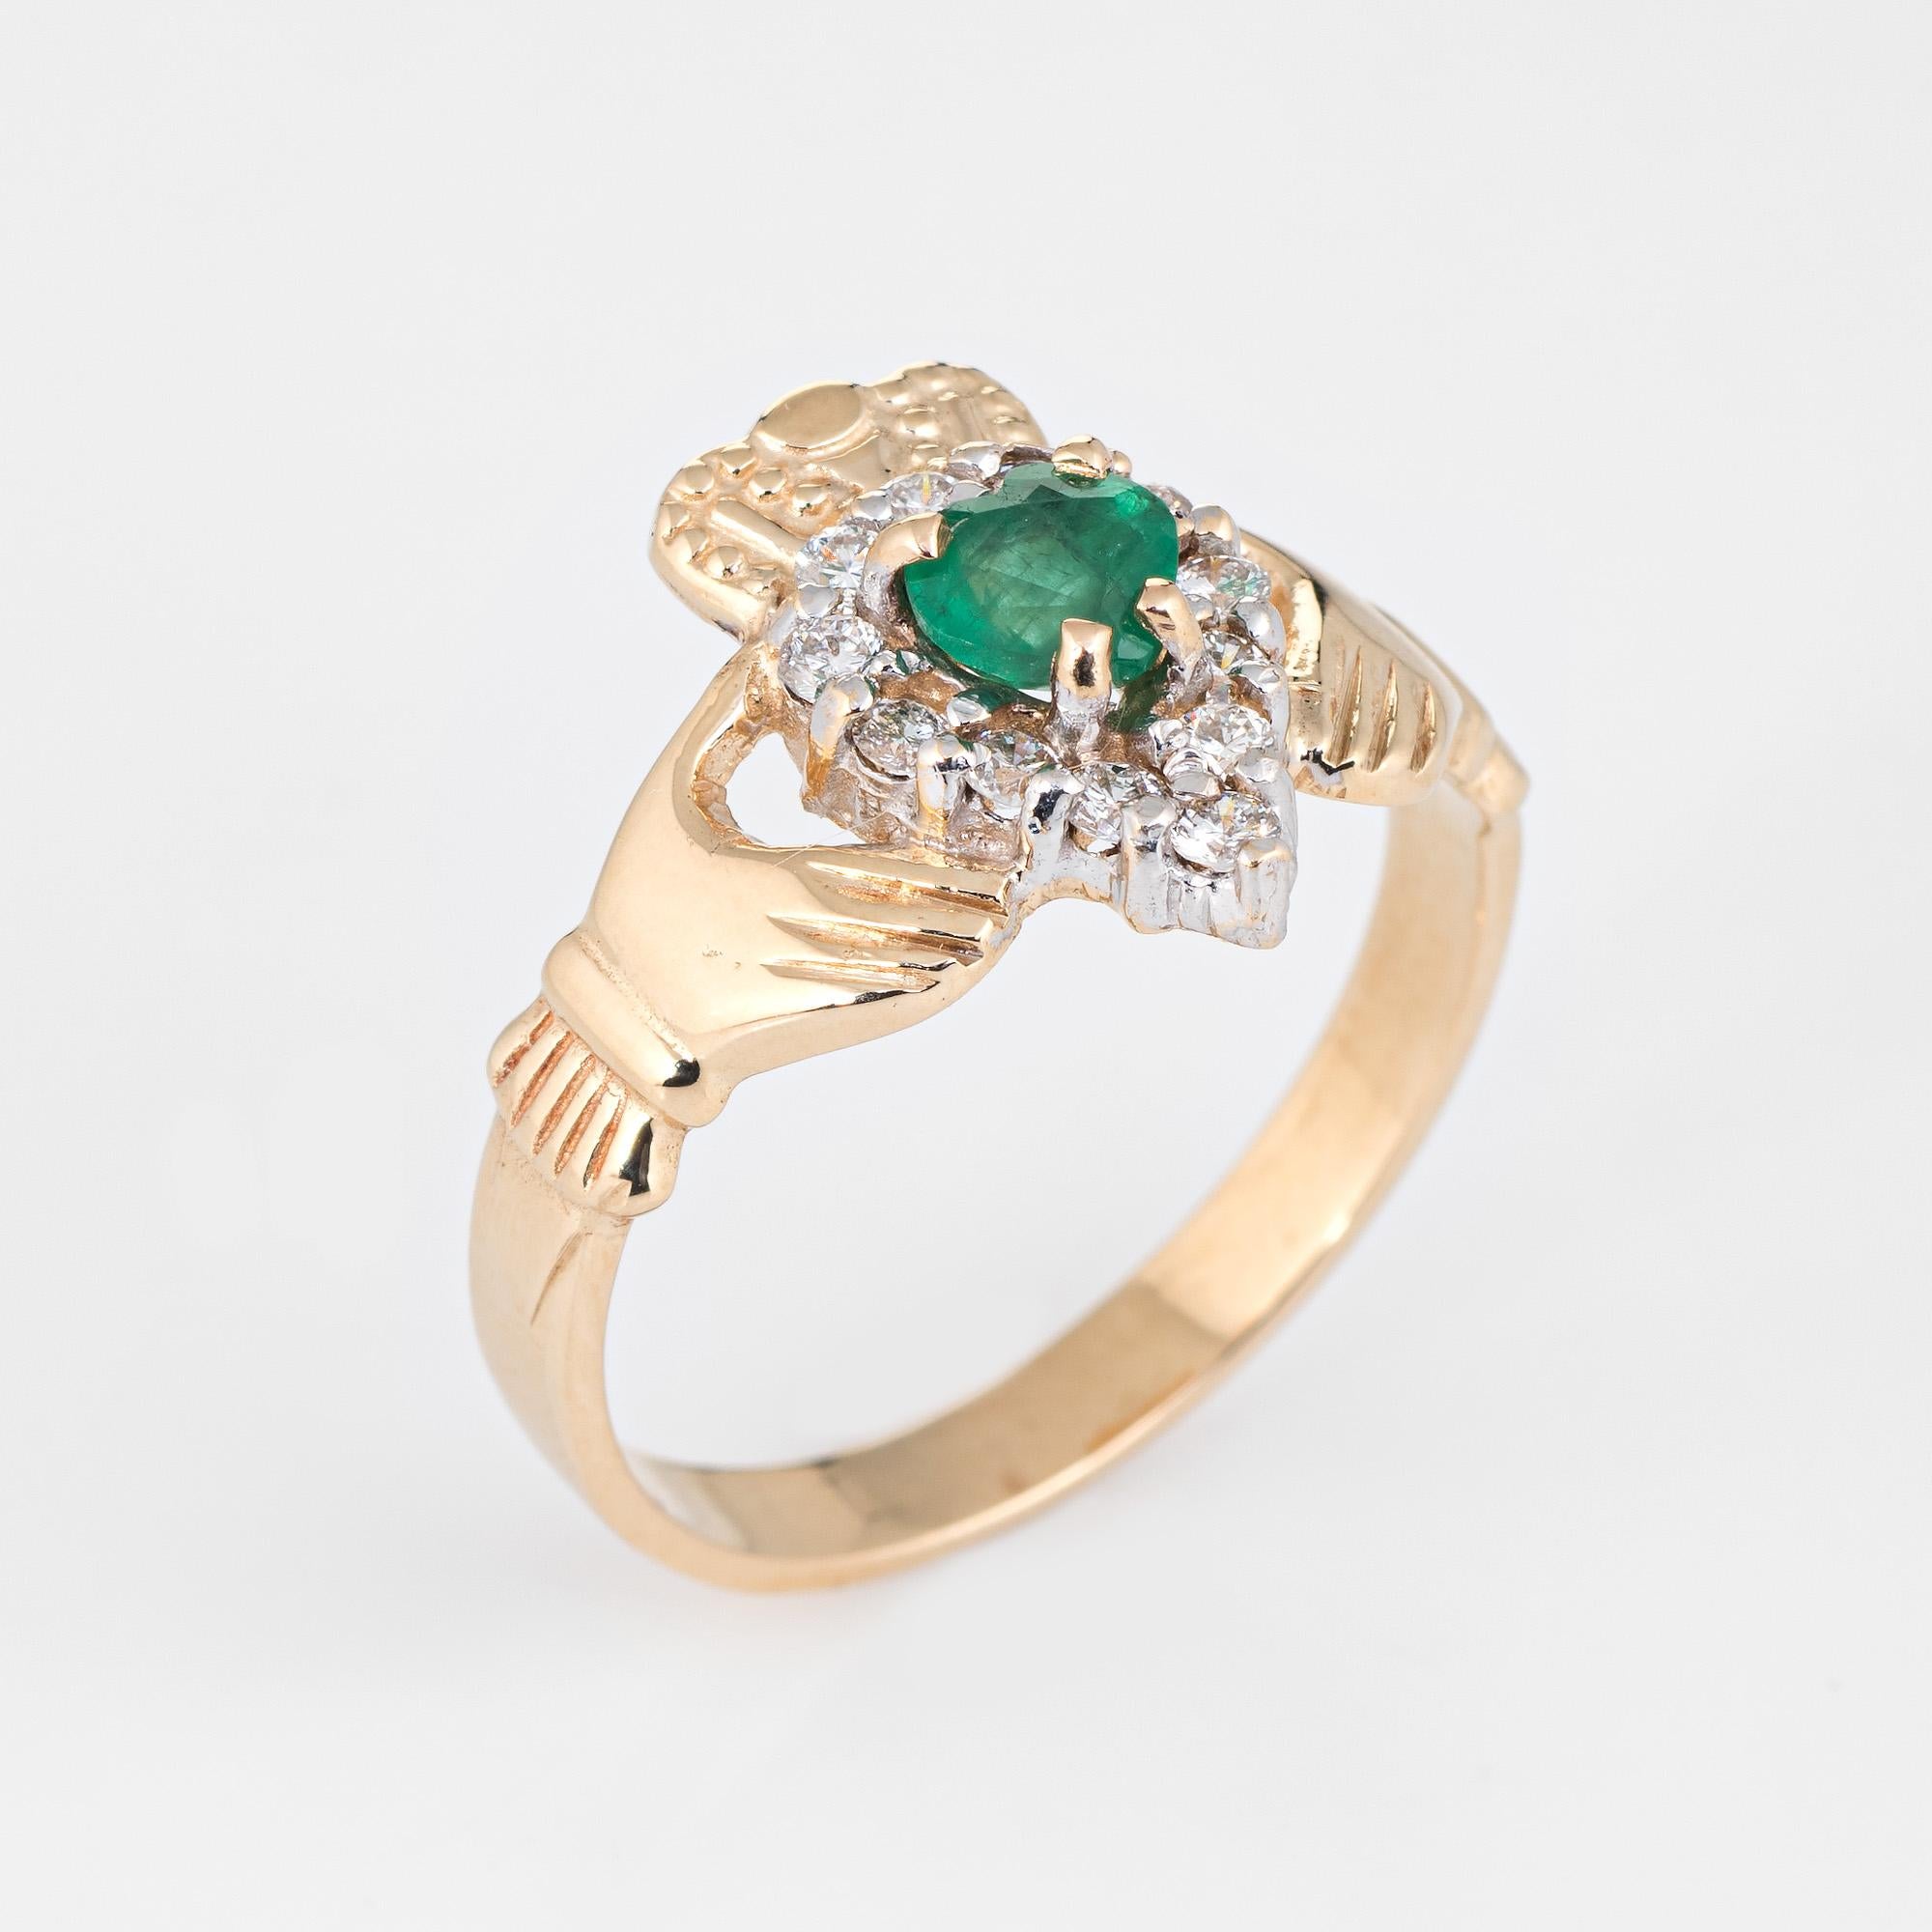 Finely detailed emerald & diamond Irish Claddagh ring crafted in 14k yellow gold. 

Centrally mounted heart cut emerald measures 5mm (estimated at 0.50 carats), accented with 12 estimated 0.03 carat round brilliant cut diamonds. The total diamond